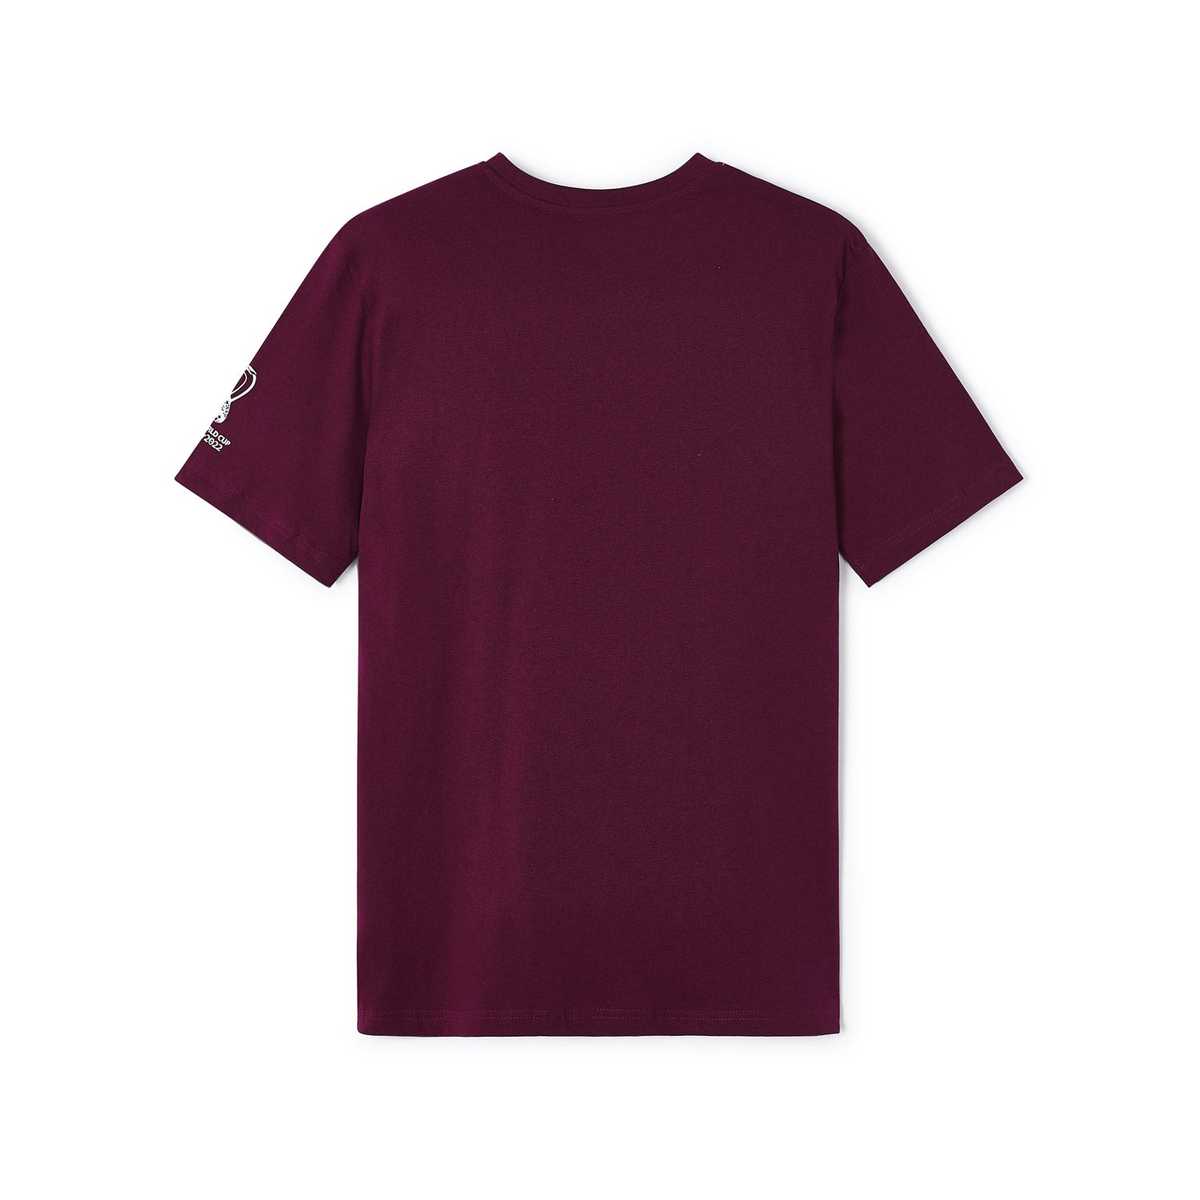 2022 World Cup Qatar Red T-Shirt - Men's - Official FIFA Store